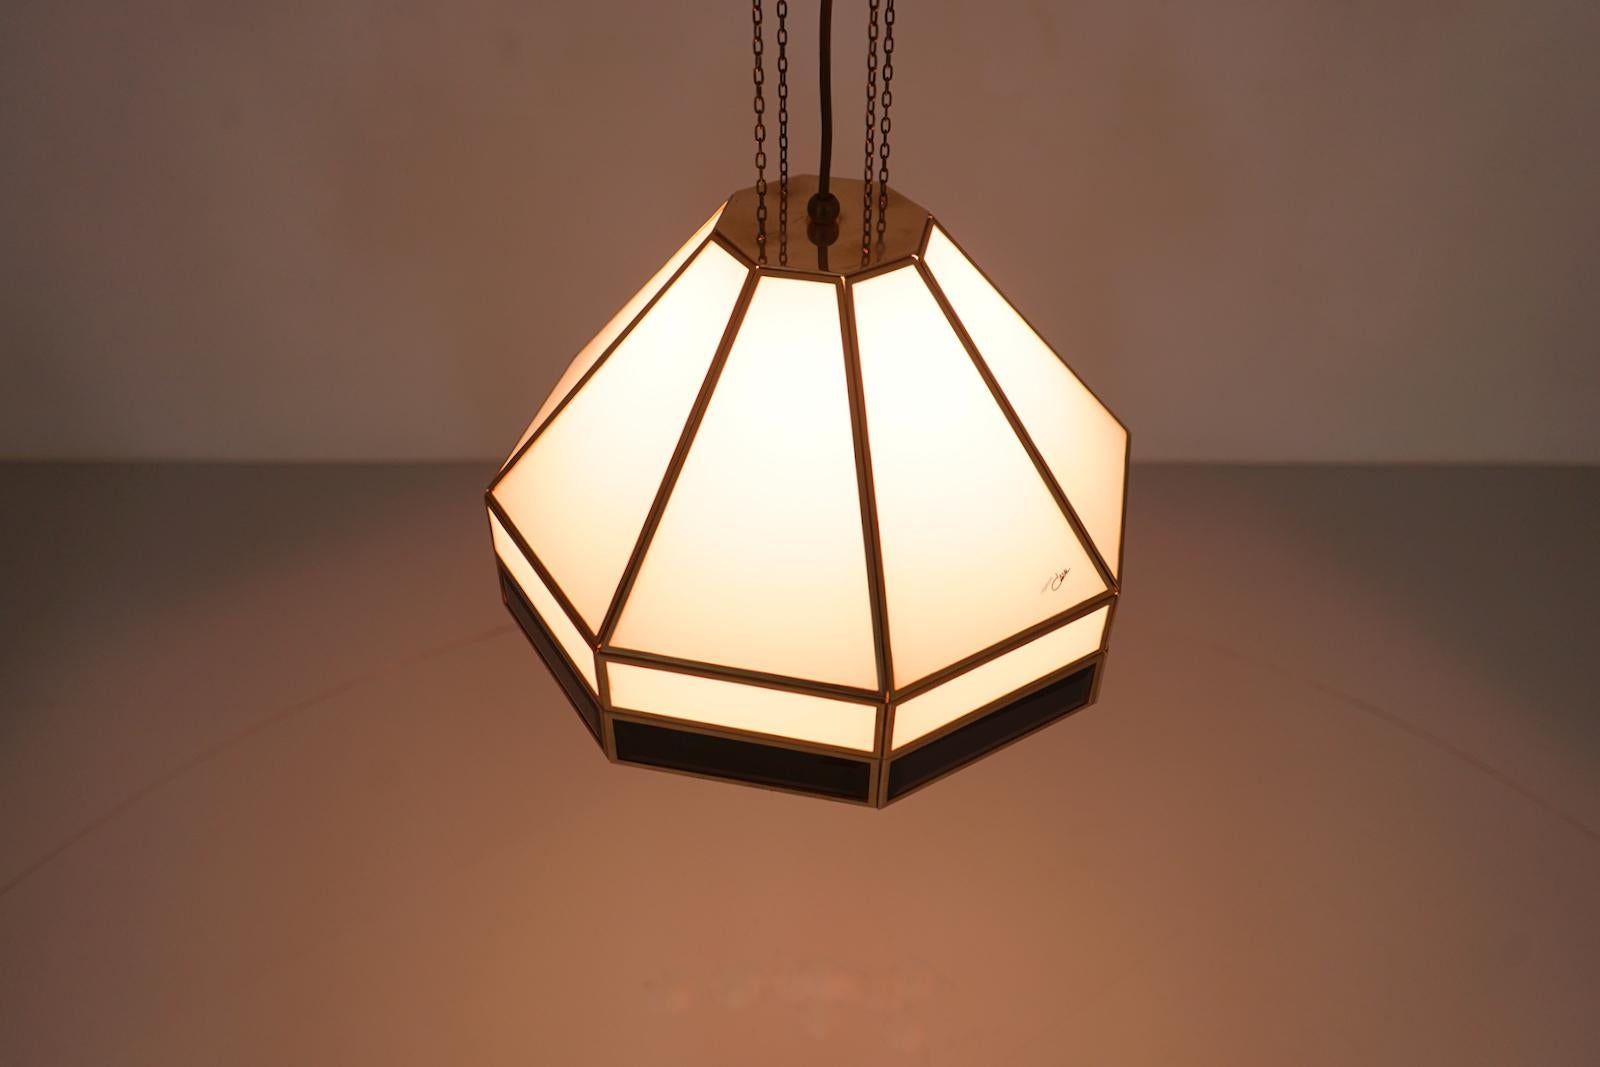 Rare glass and brass pendant by Cari Zalloni for Cazal, 1969.


Total height with chain: 140 cm

Very good condition.